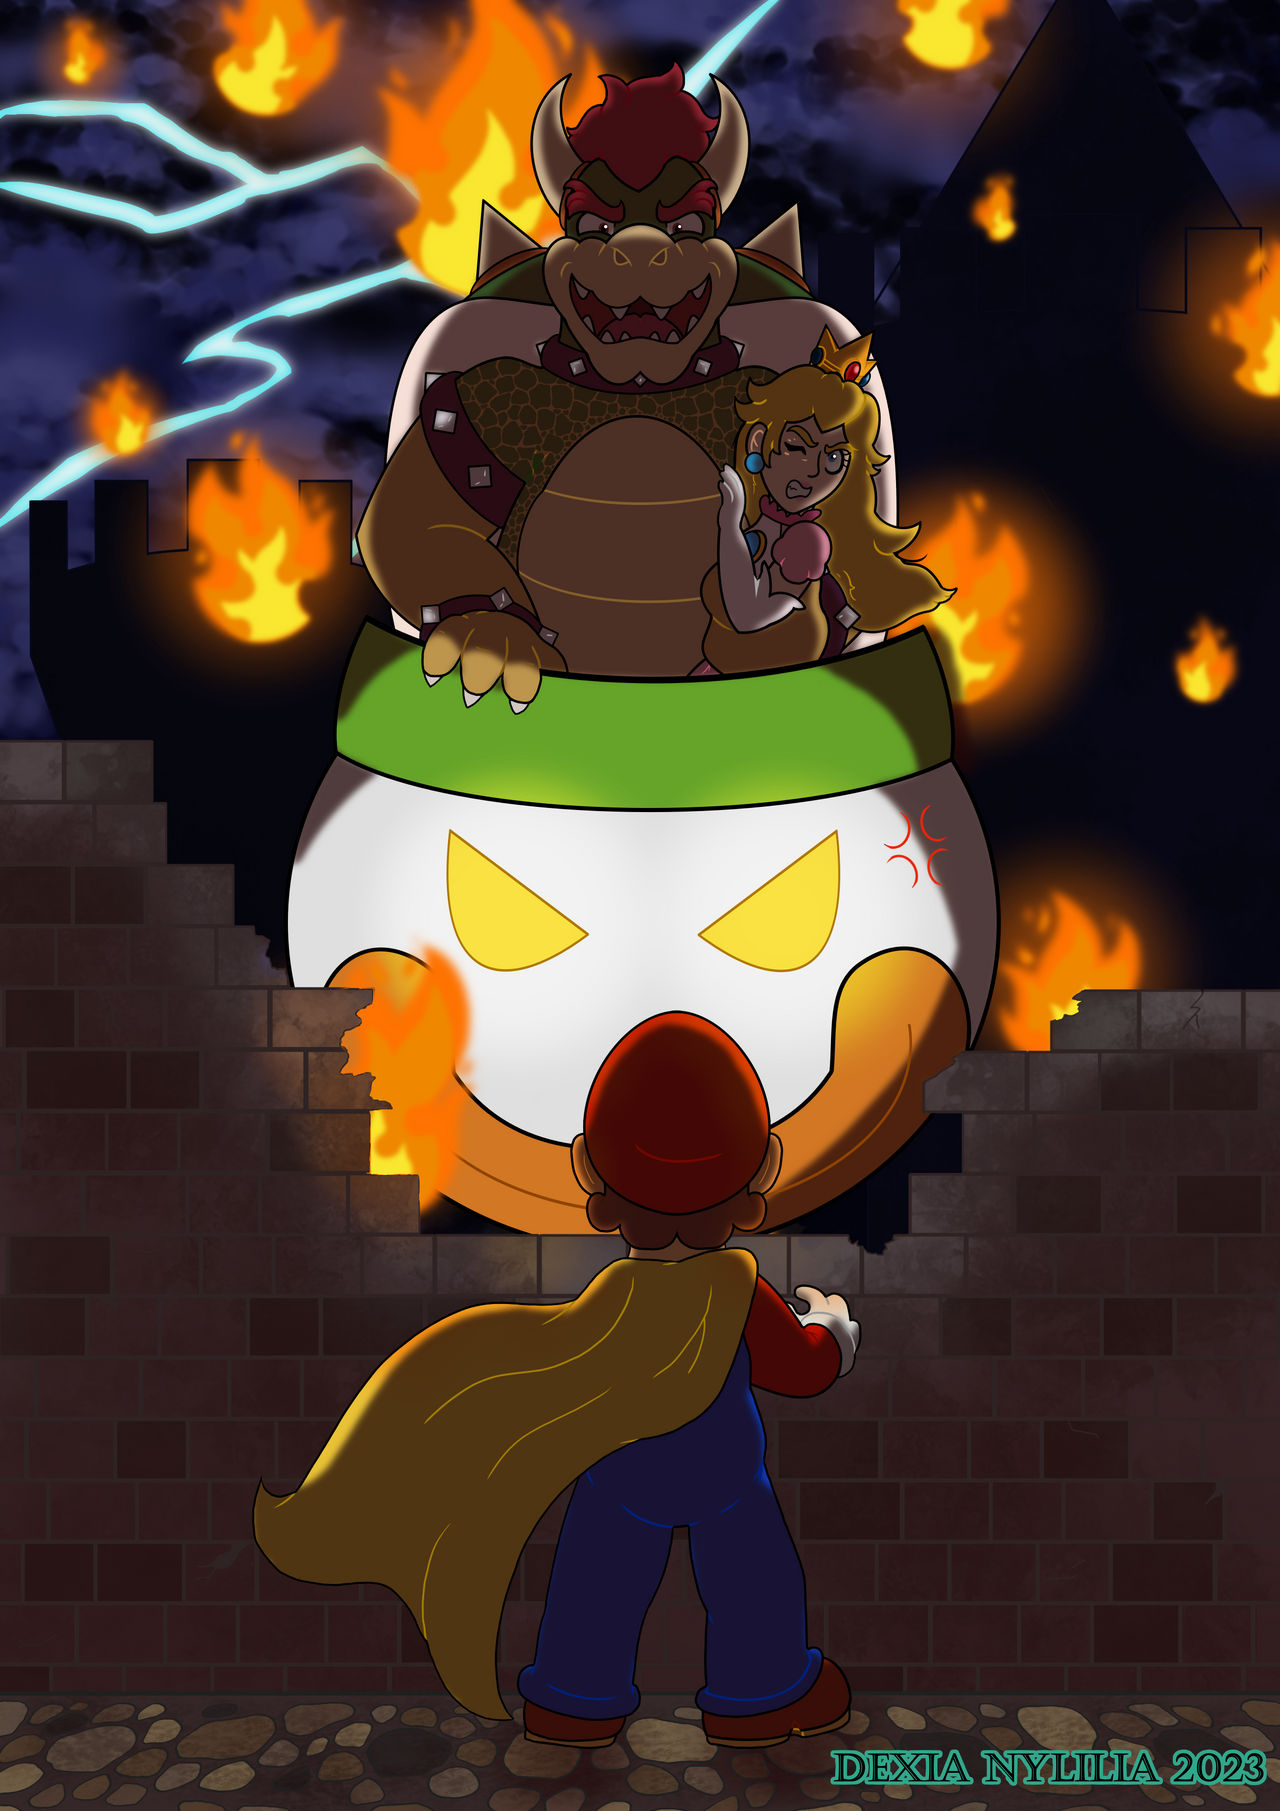 Super Mario Movie - Bowser Redraw by NoahtheArtWizard2001 on